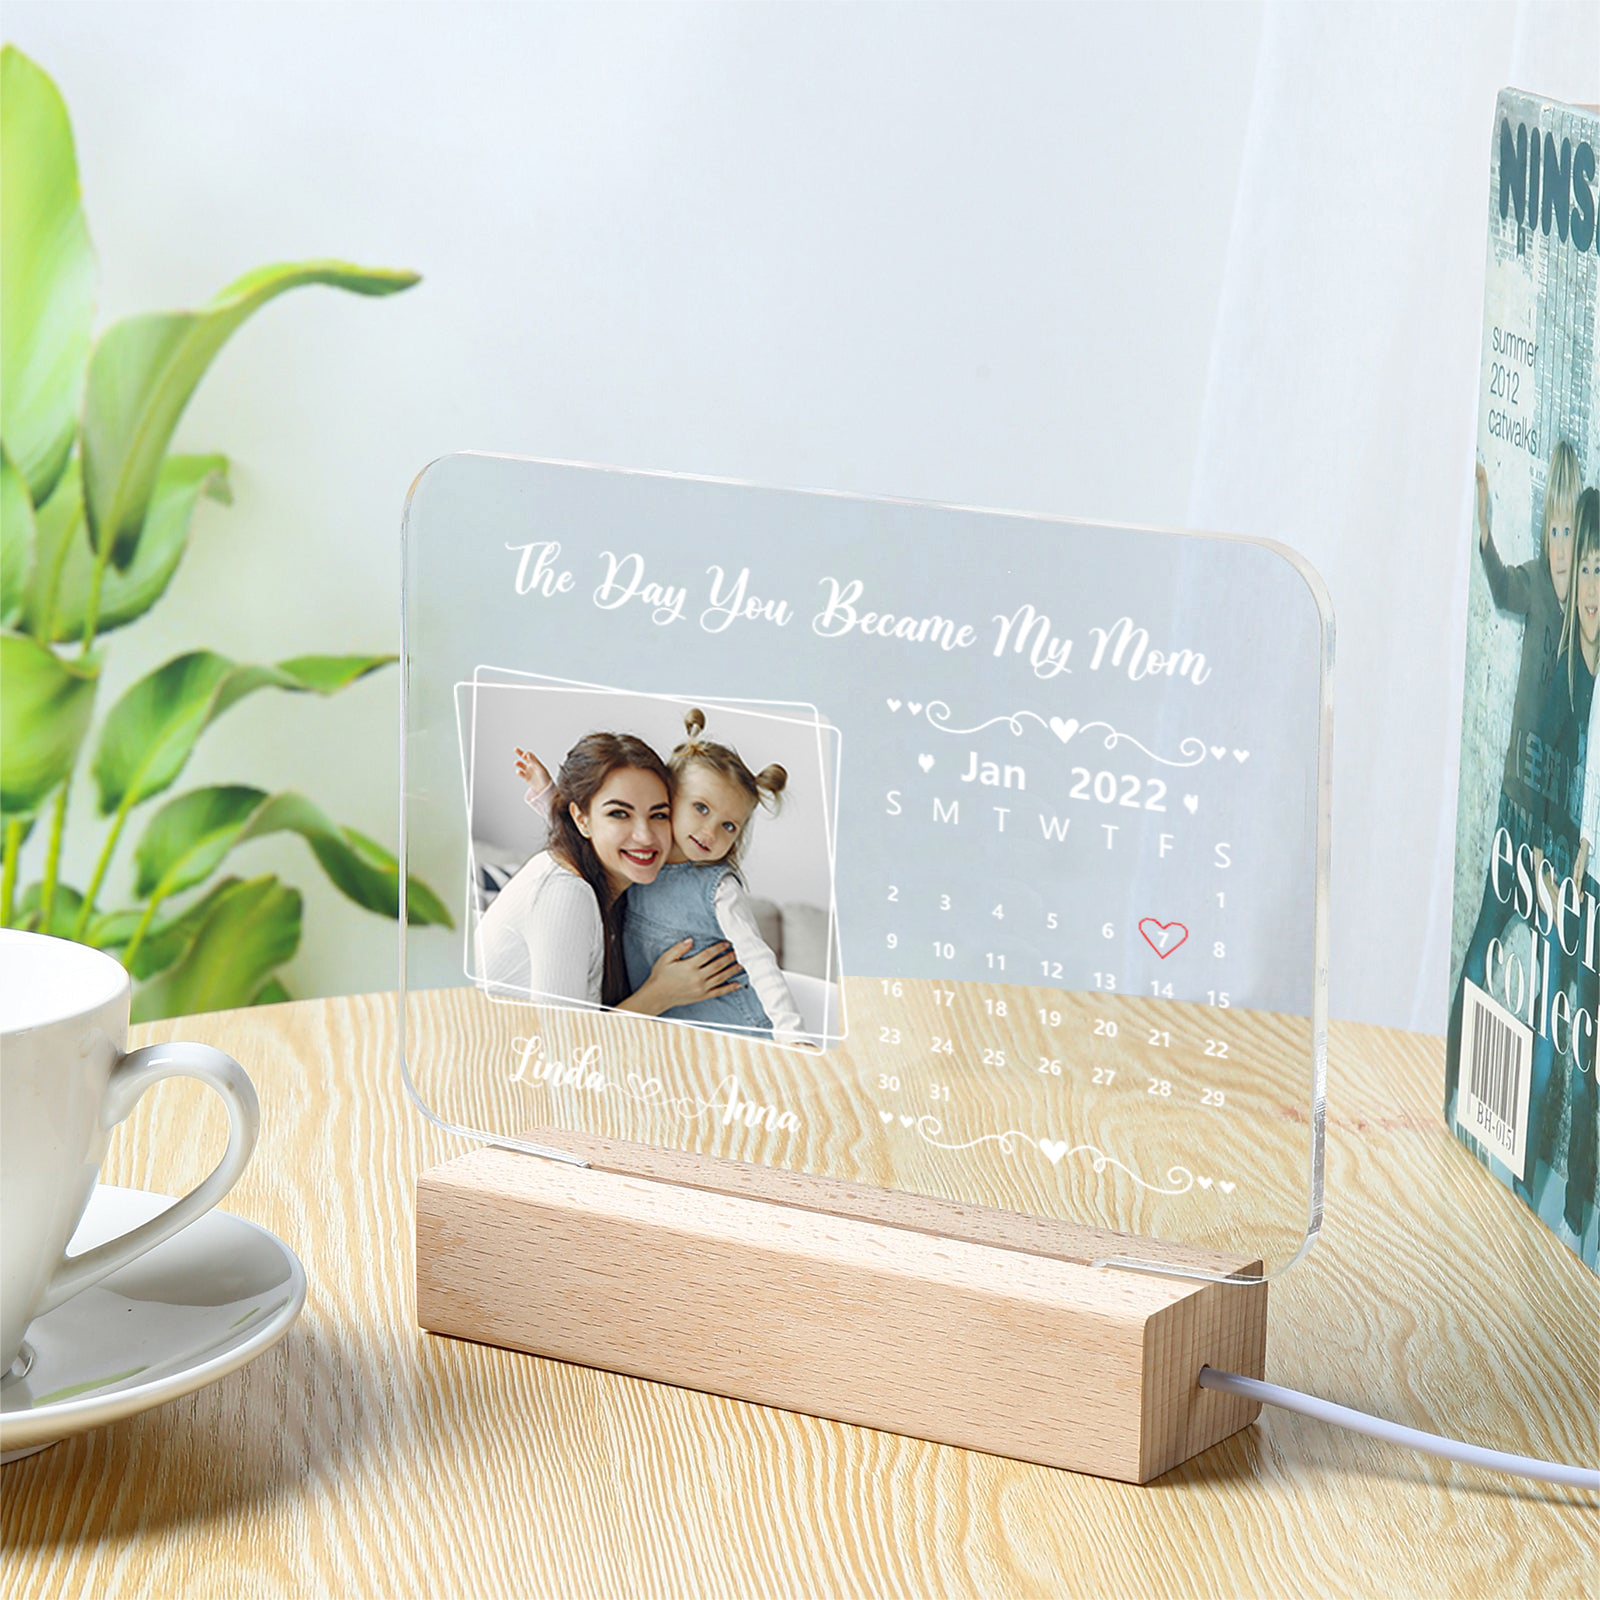 To My Mom - "The Day You Became My Mom" Night Light Photo Text Customized LED Bedroom Decor for Mom